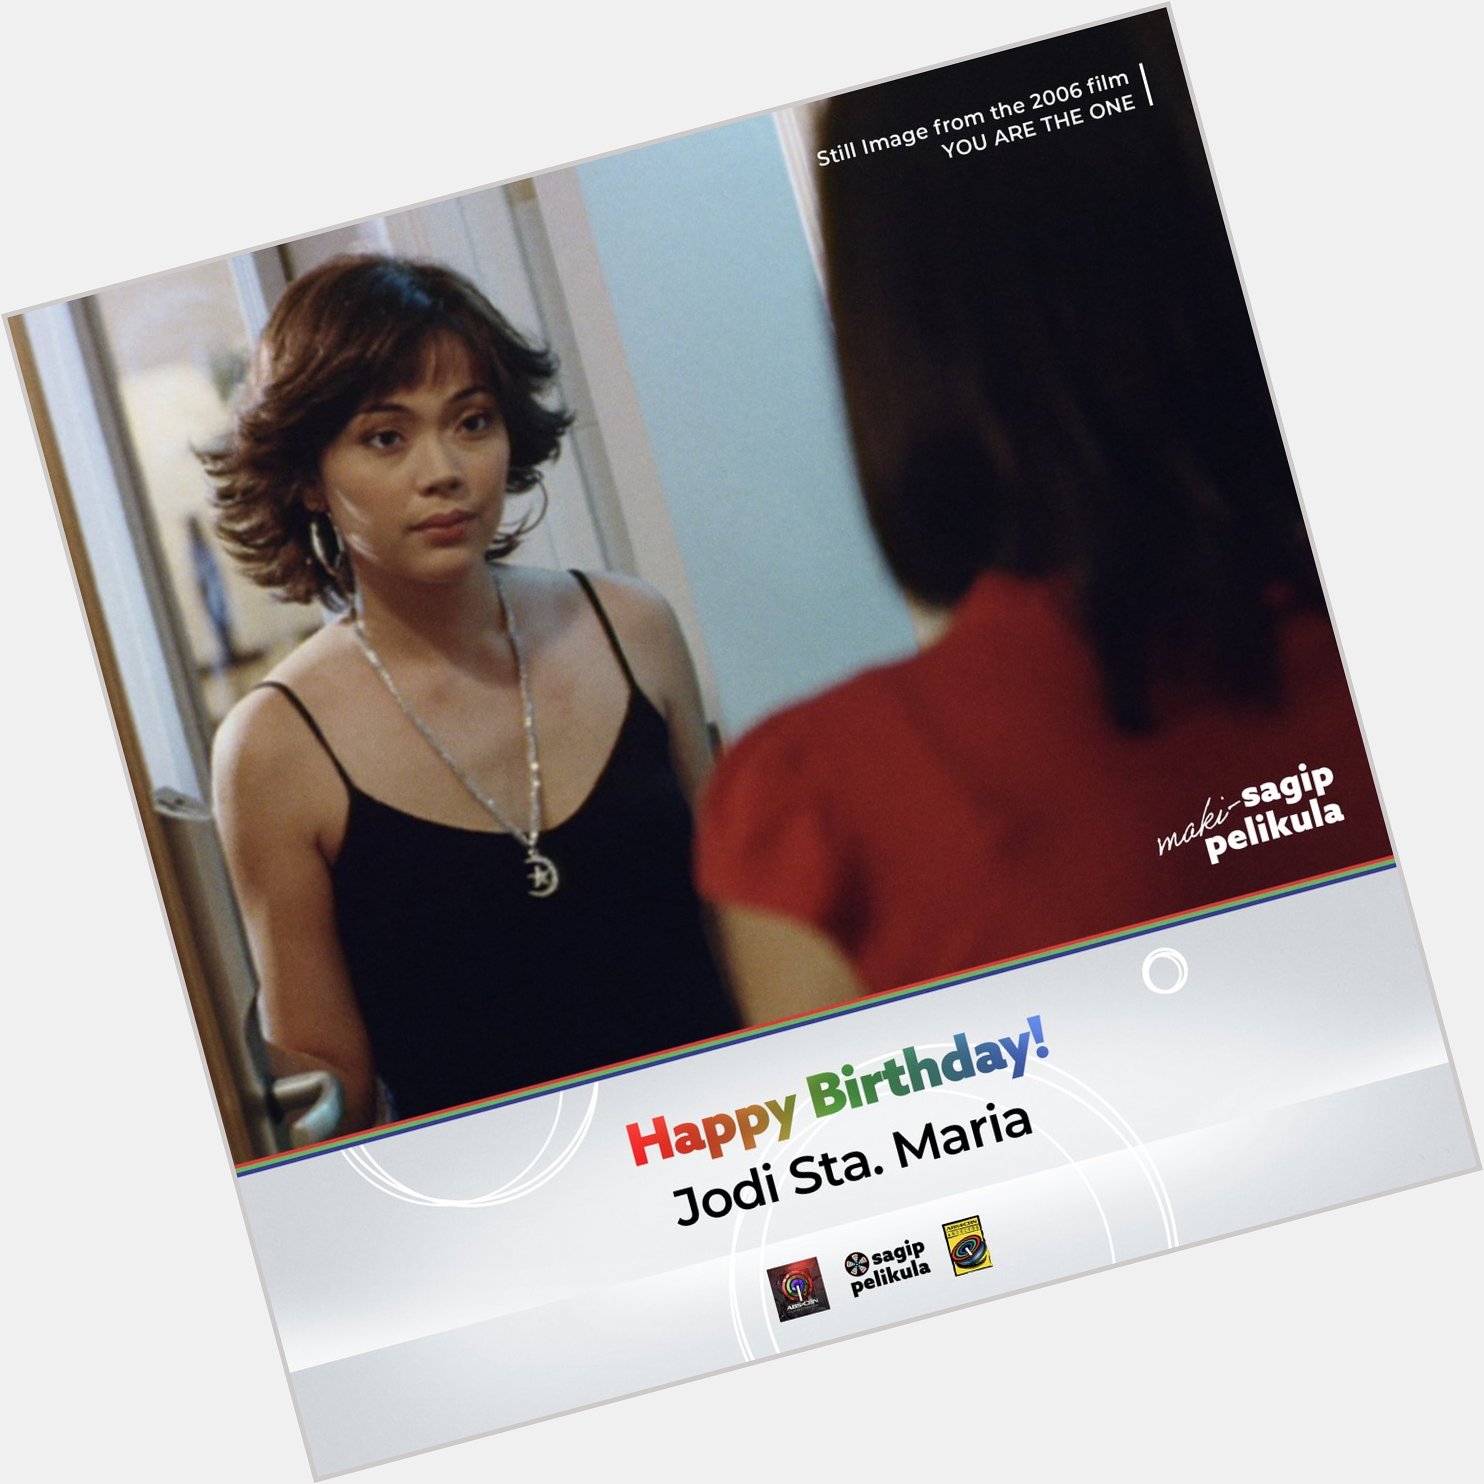 Happy birthday to Jodi Sta. Maria!

What\s your favorite film of hers?   